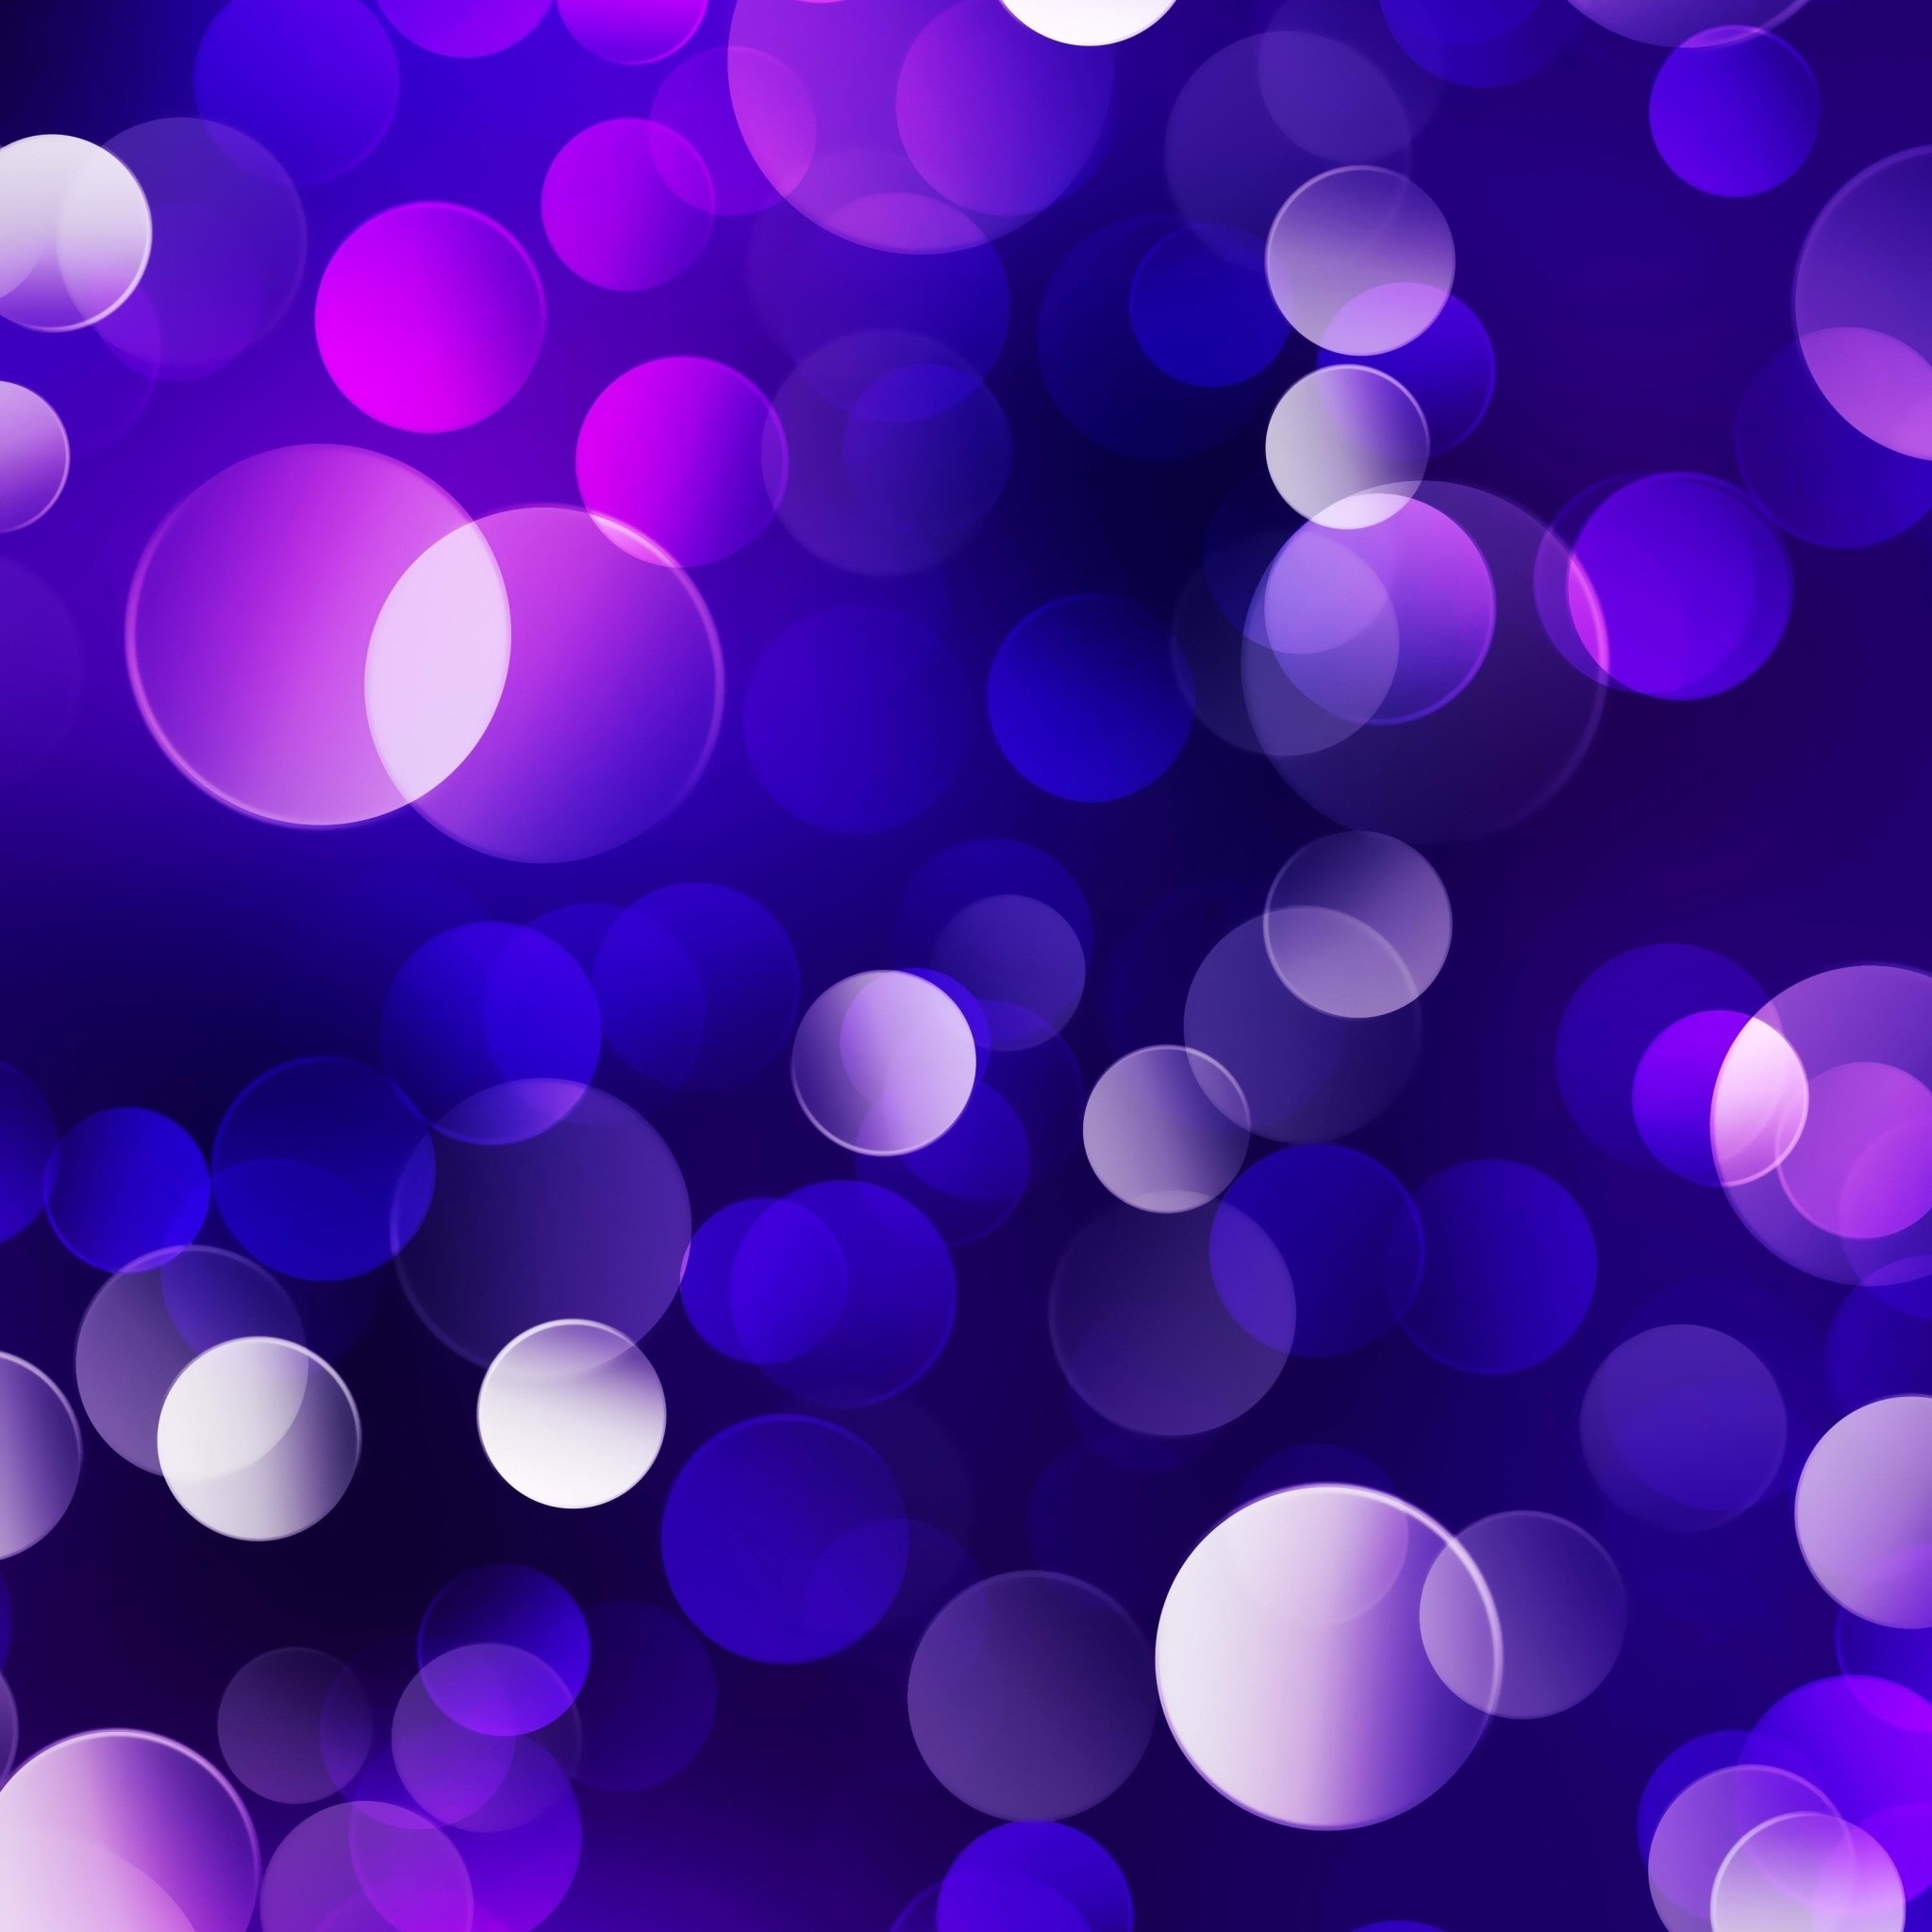 2048x2048 Purple Abstract Background HD wallpaper download in , 1024x1024  resolutions. Find similar and same. Cool WallpaperWallpaper DesktopPhone ...